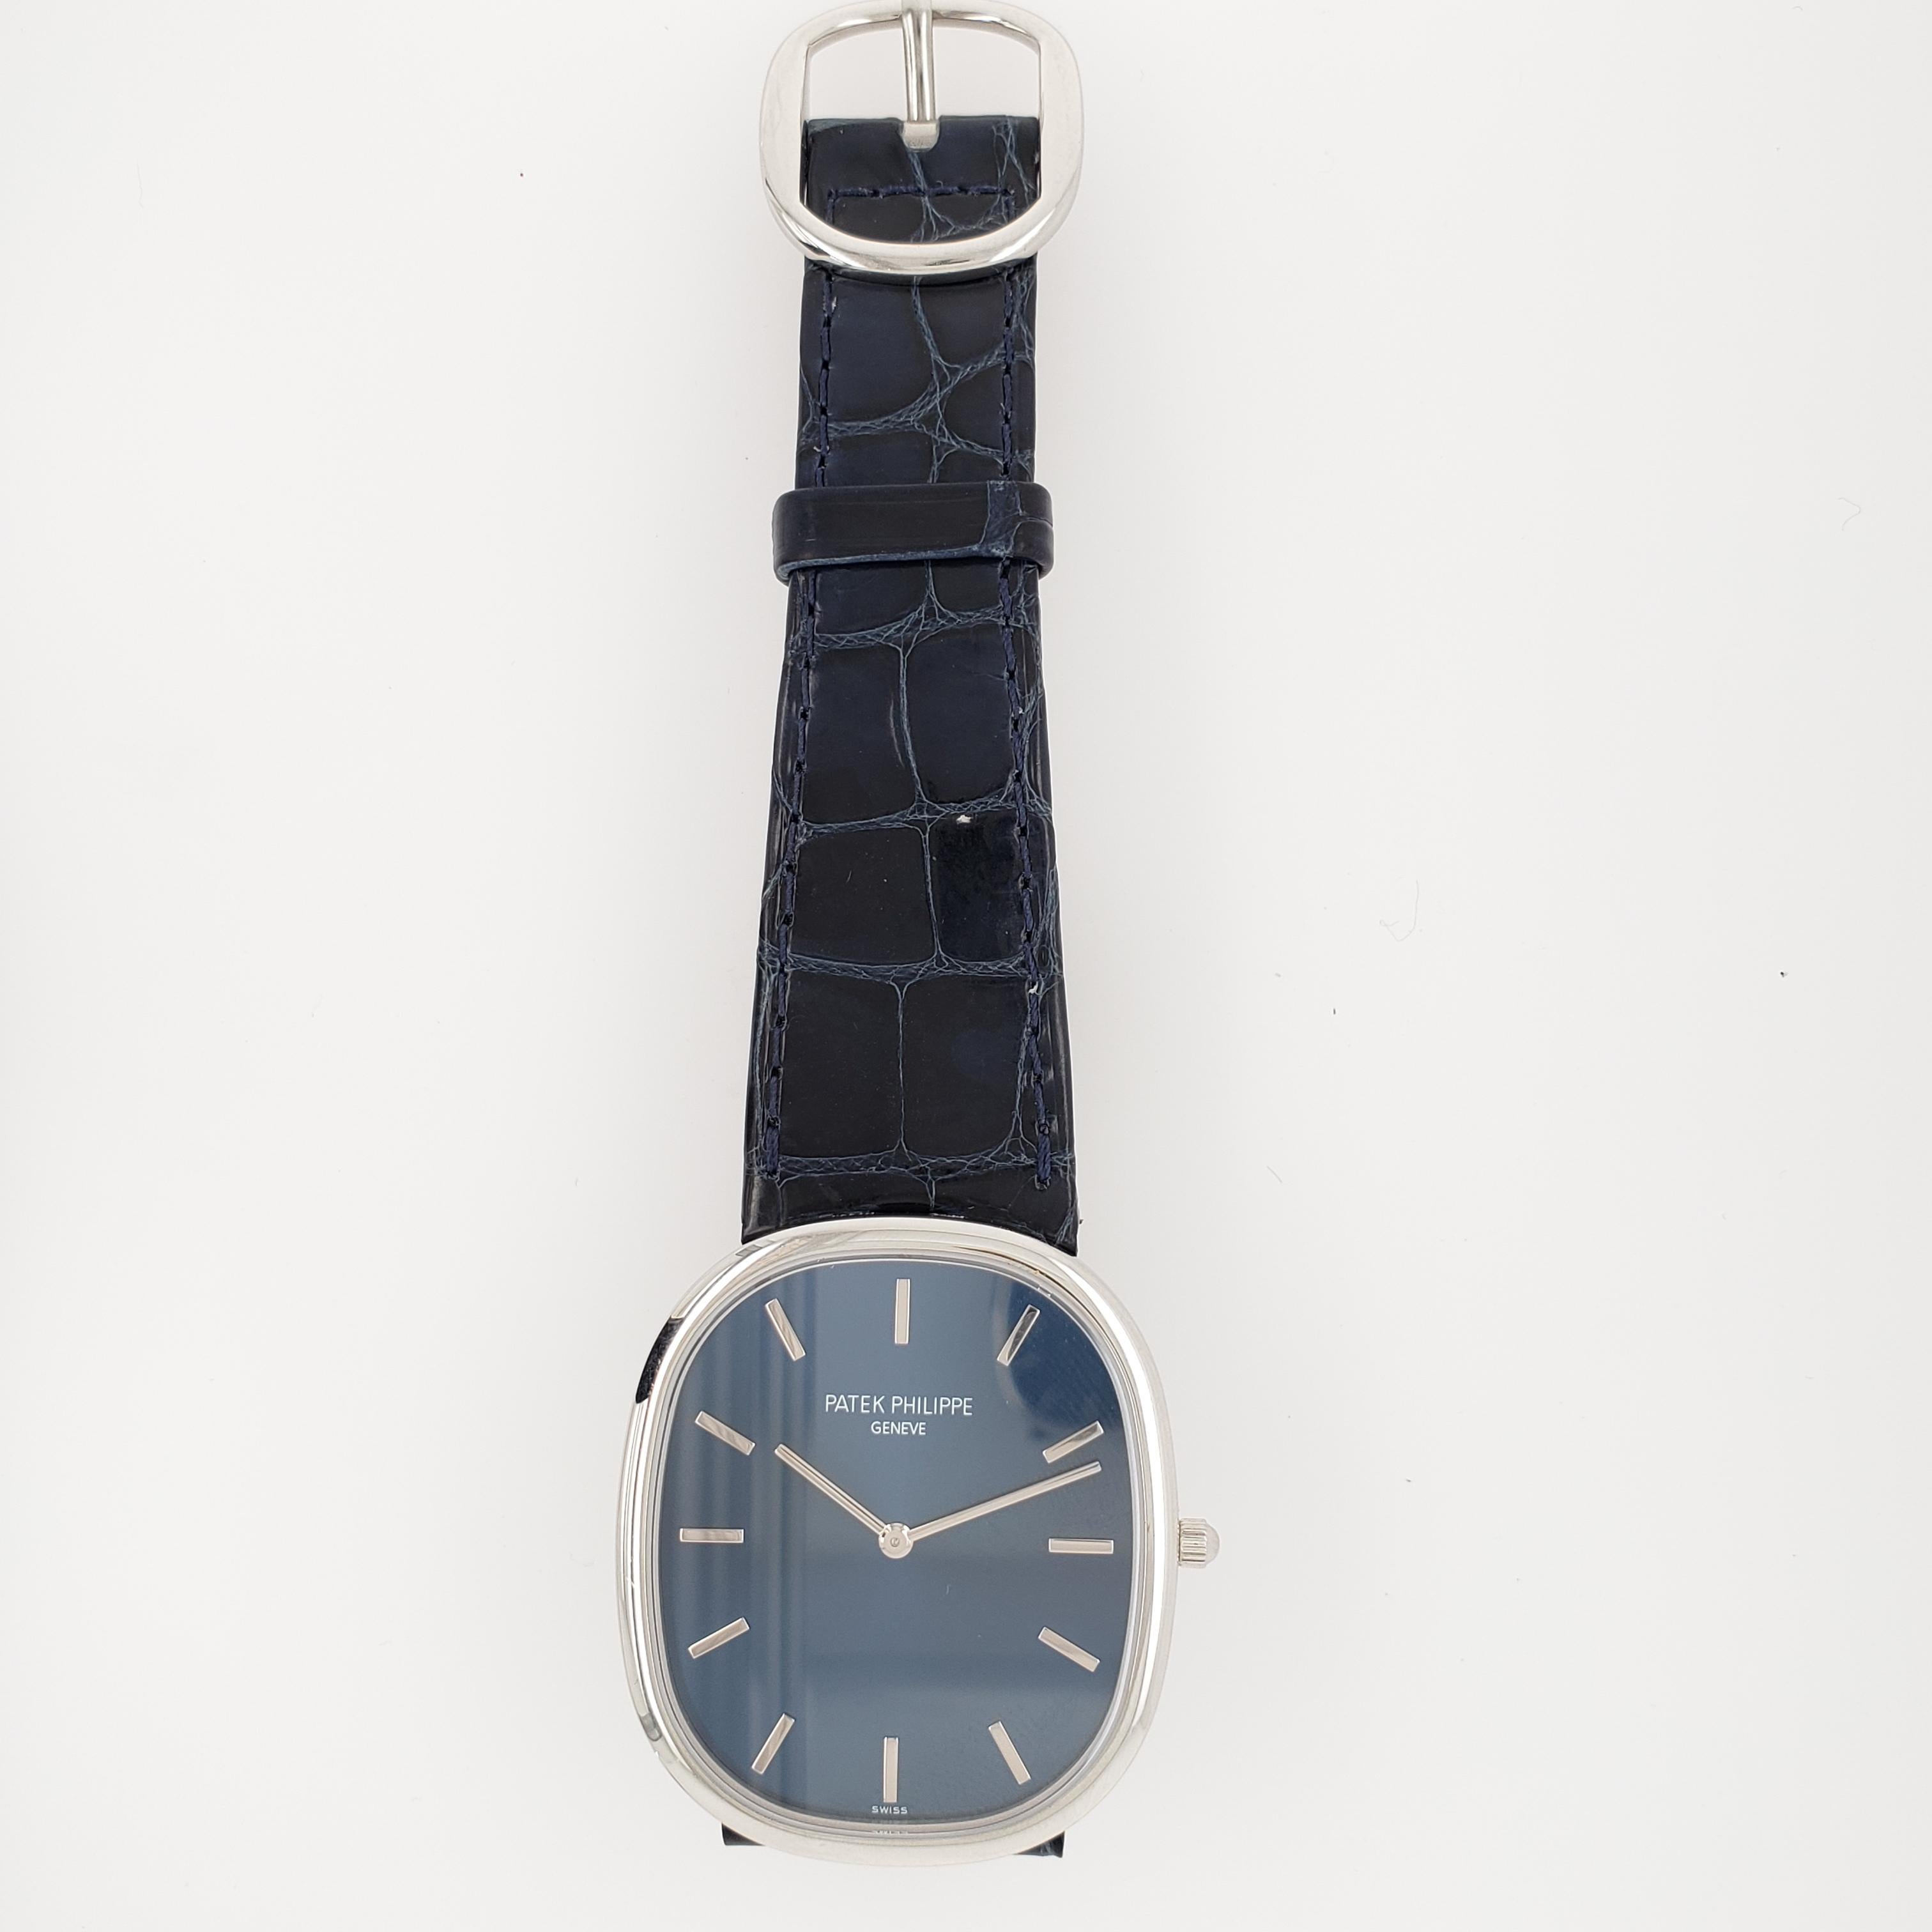 Vintage Patek Philippe Ellipse, model 5738P-001. This watch features a self winding movement with a blue dial, stick markers and a blue leather strap. No box or papers. 